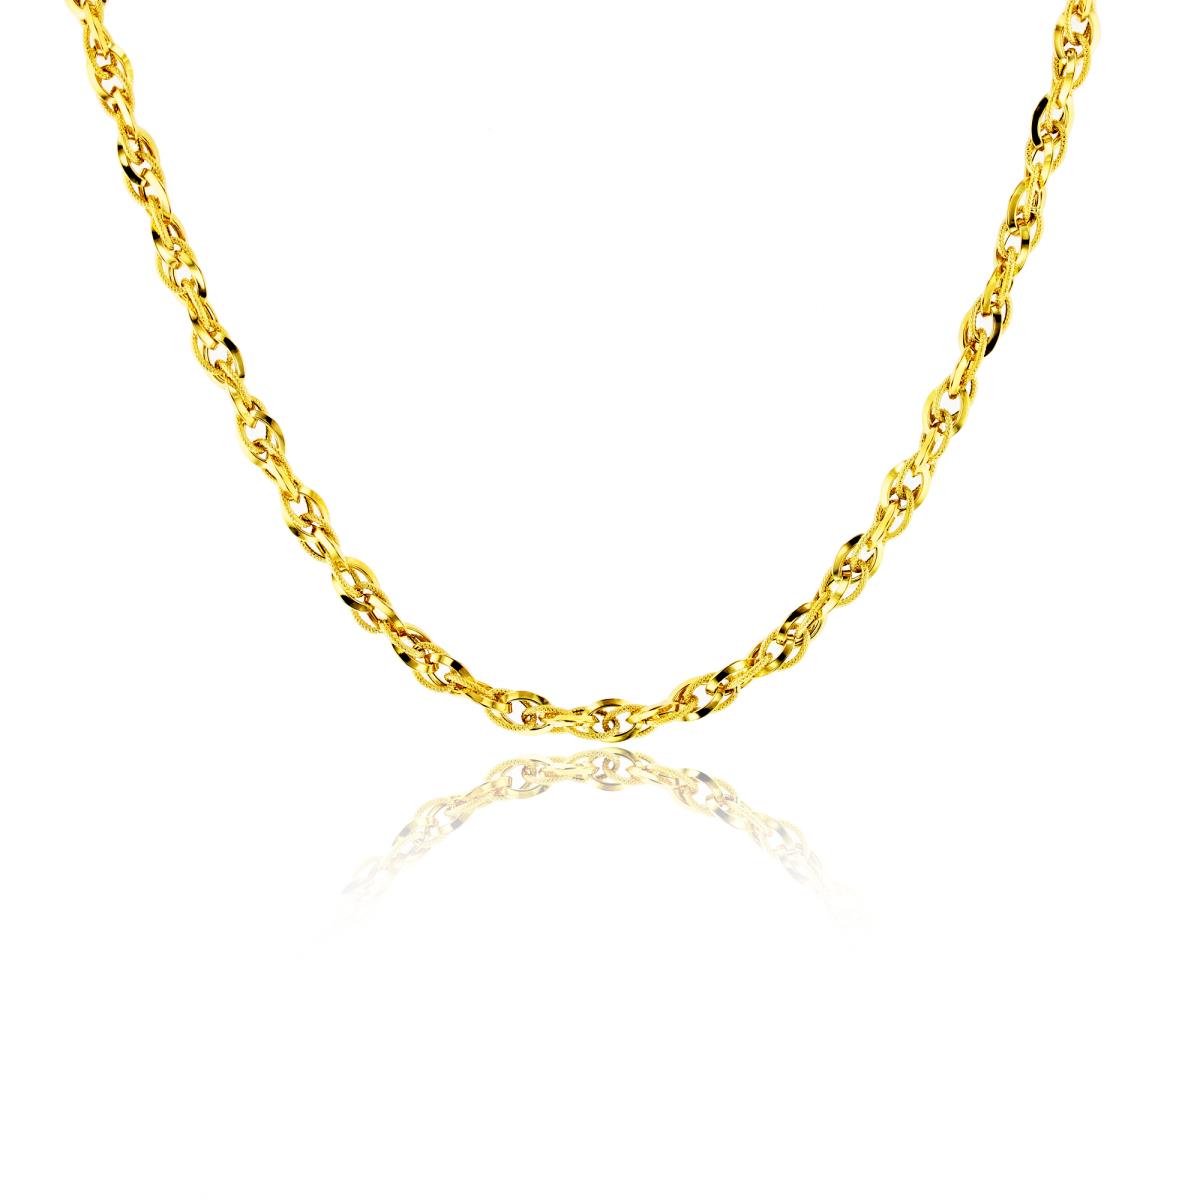 10K Yellow Gold Polished & Textured Triple Oval Linked Italian 19"Necklace